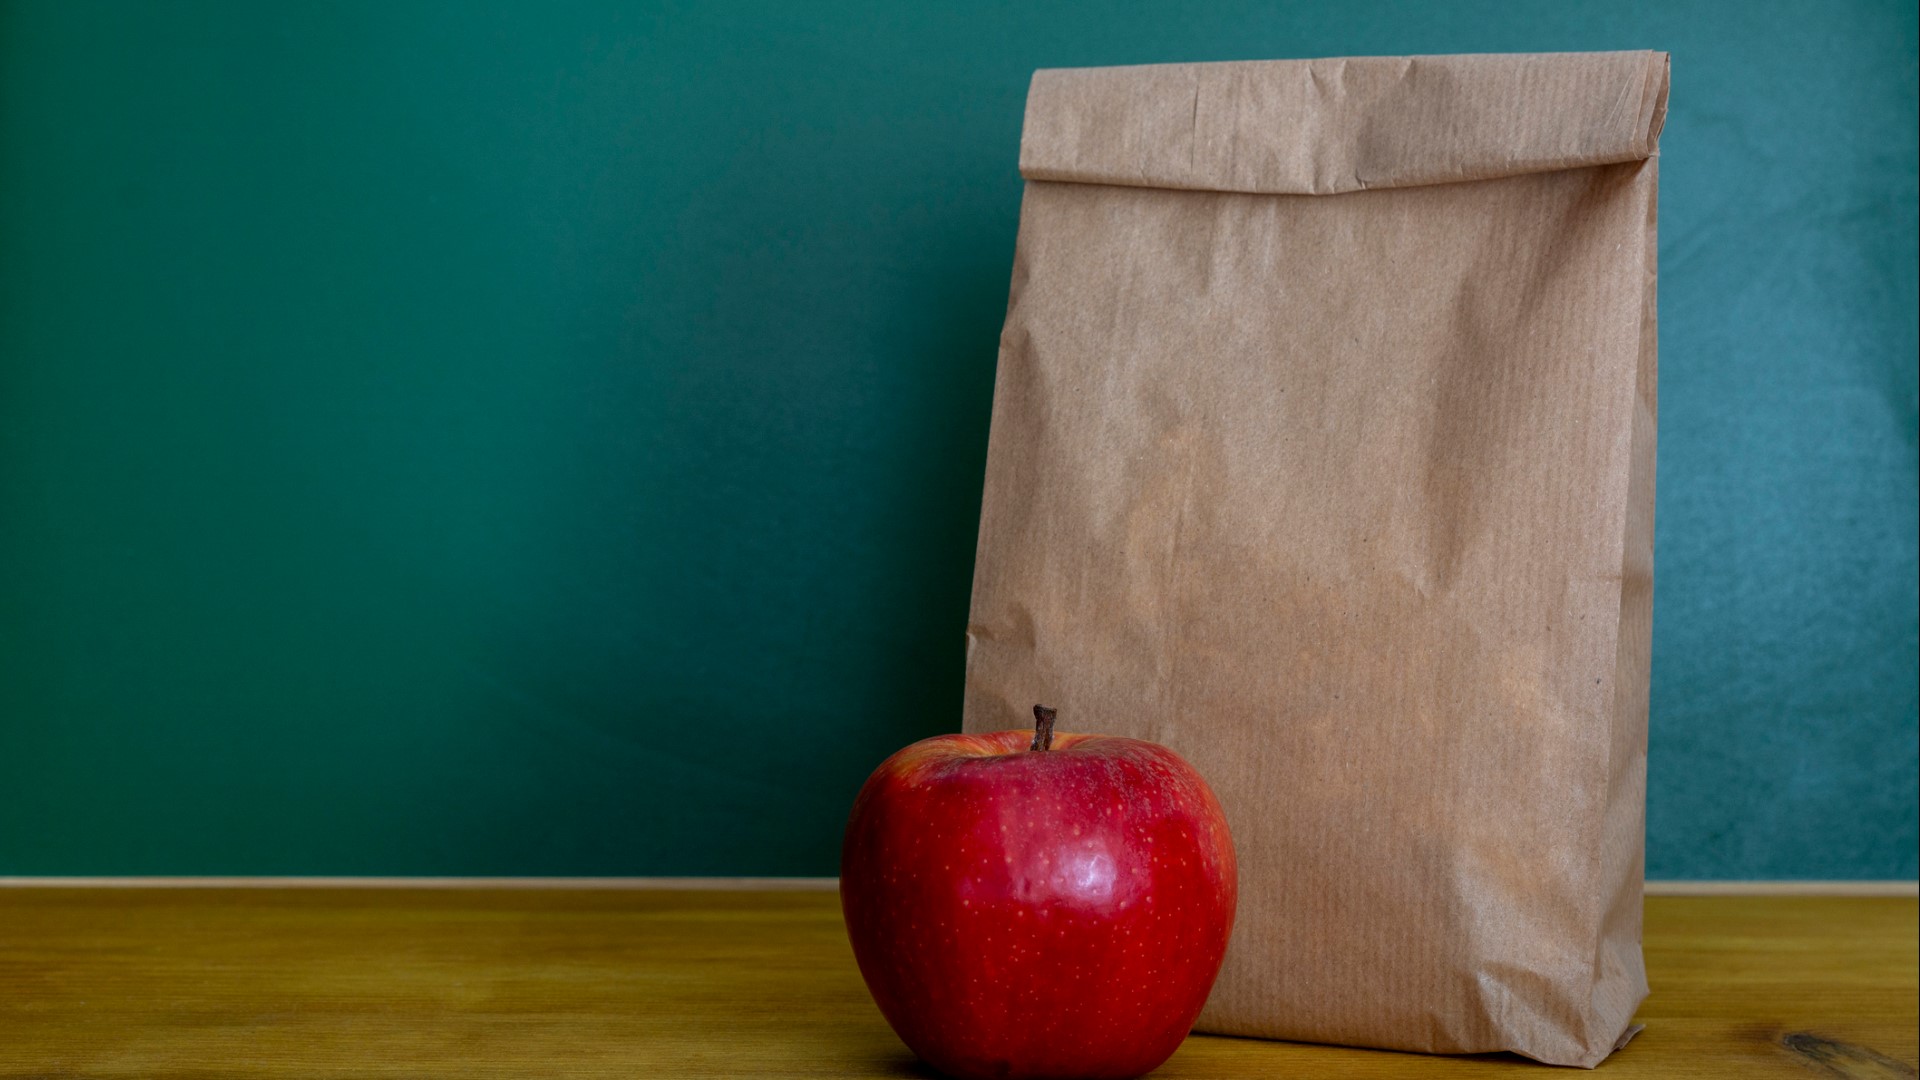 Most districts have come up with plans to distribute meals to students during the three week closure.